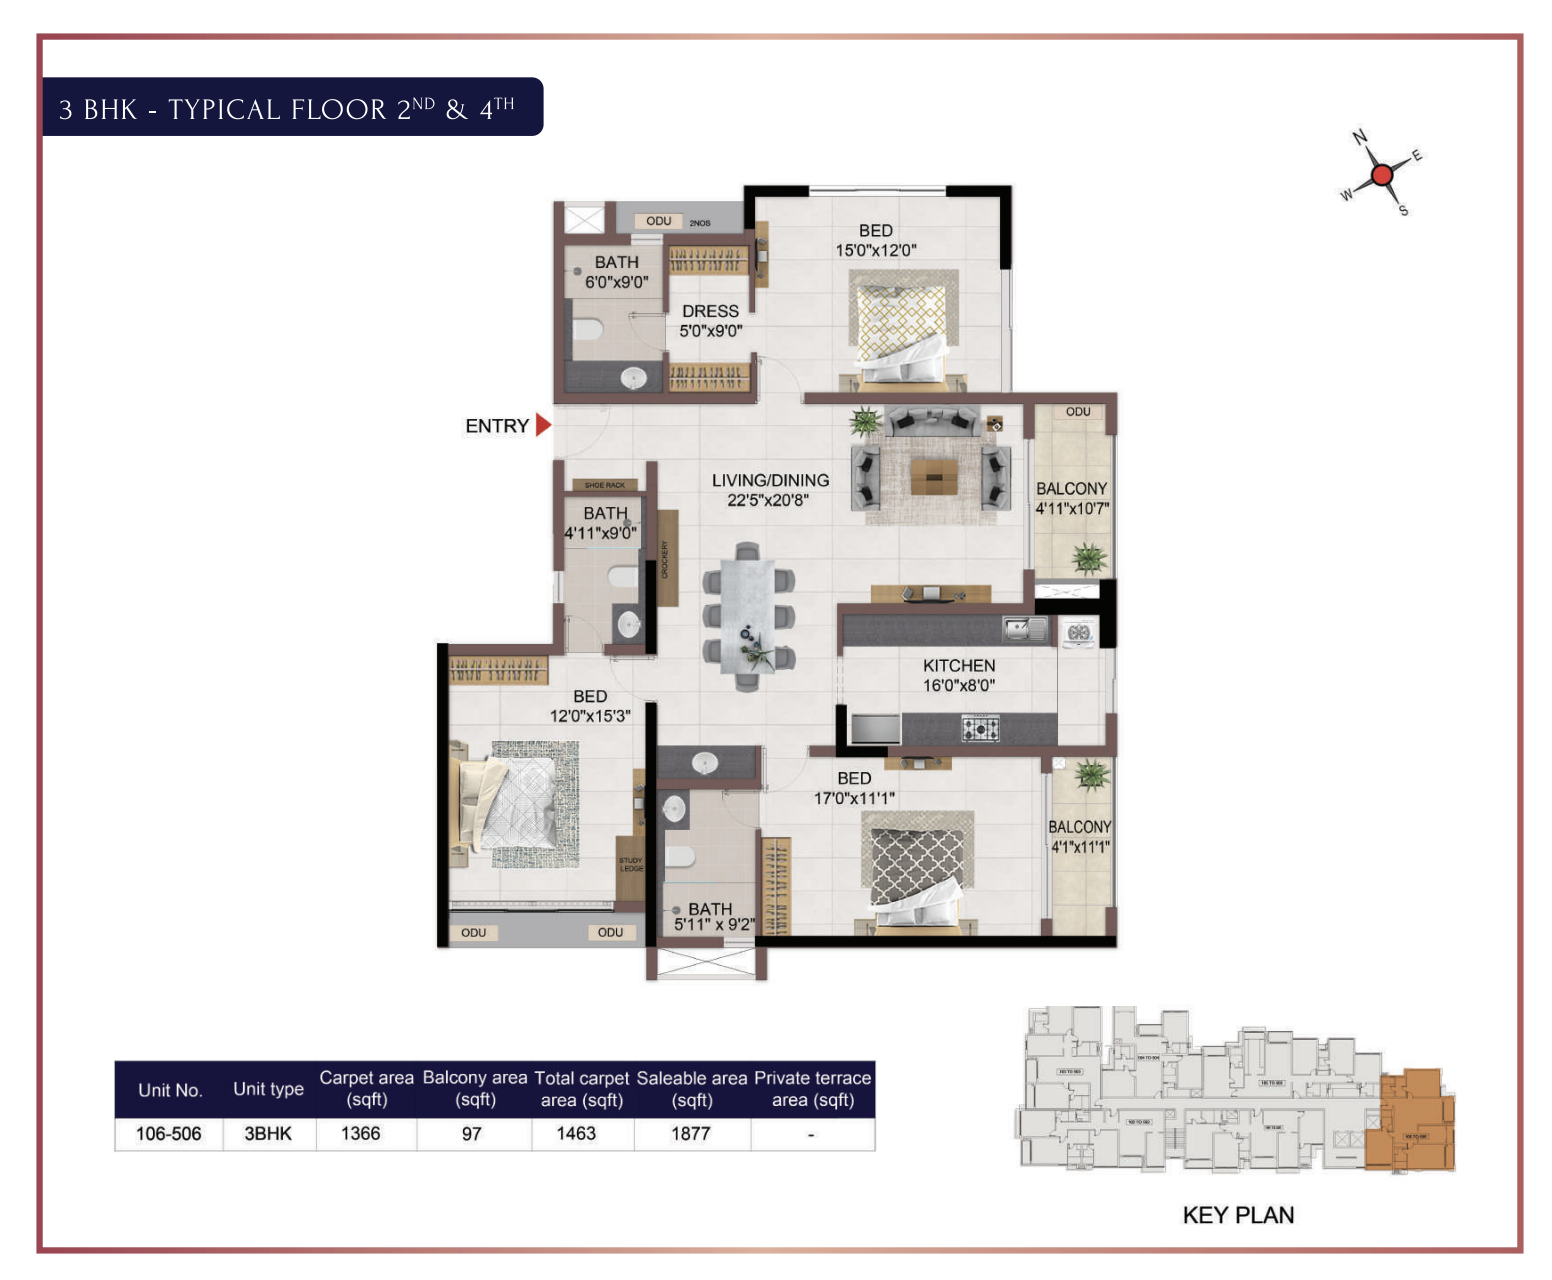 Casagrand Dior - 3BHK - Typical Floor Plan - 2nd and 4th